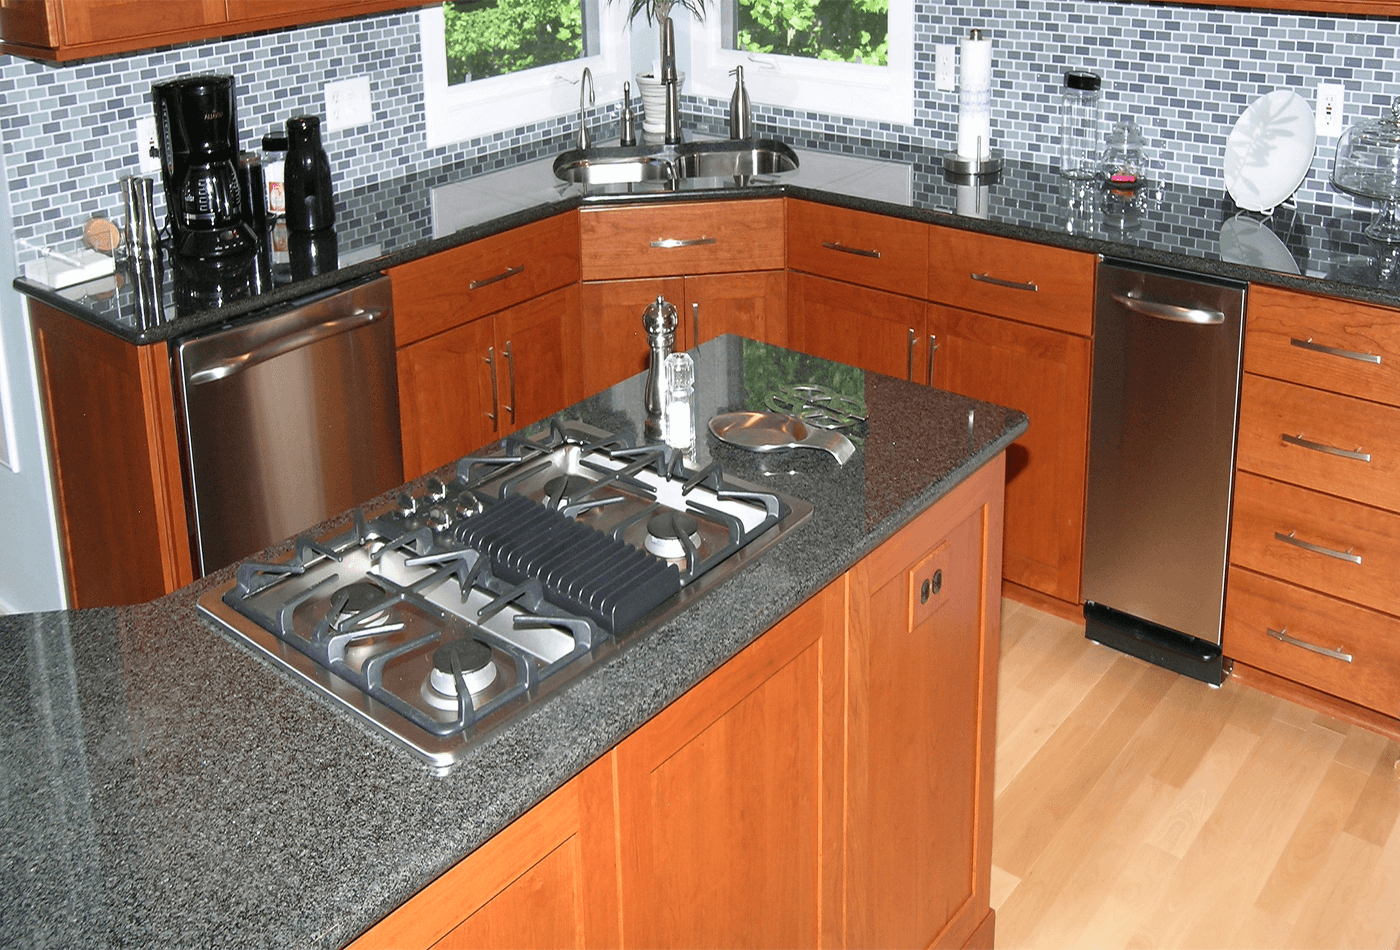 What are the Benefits of this Black Granite